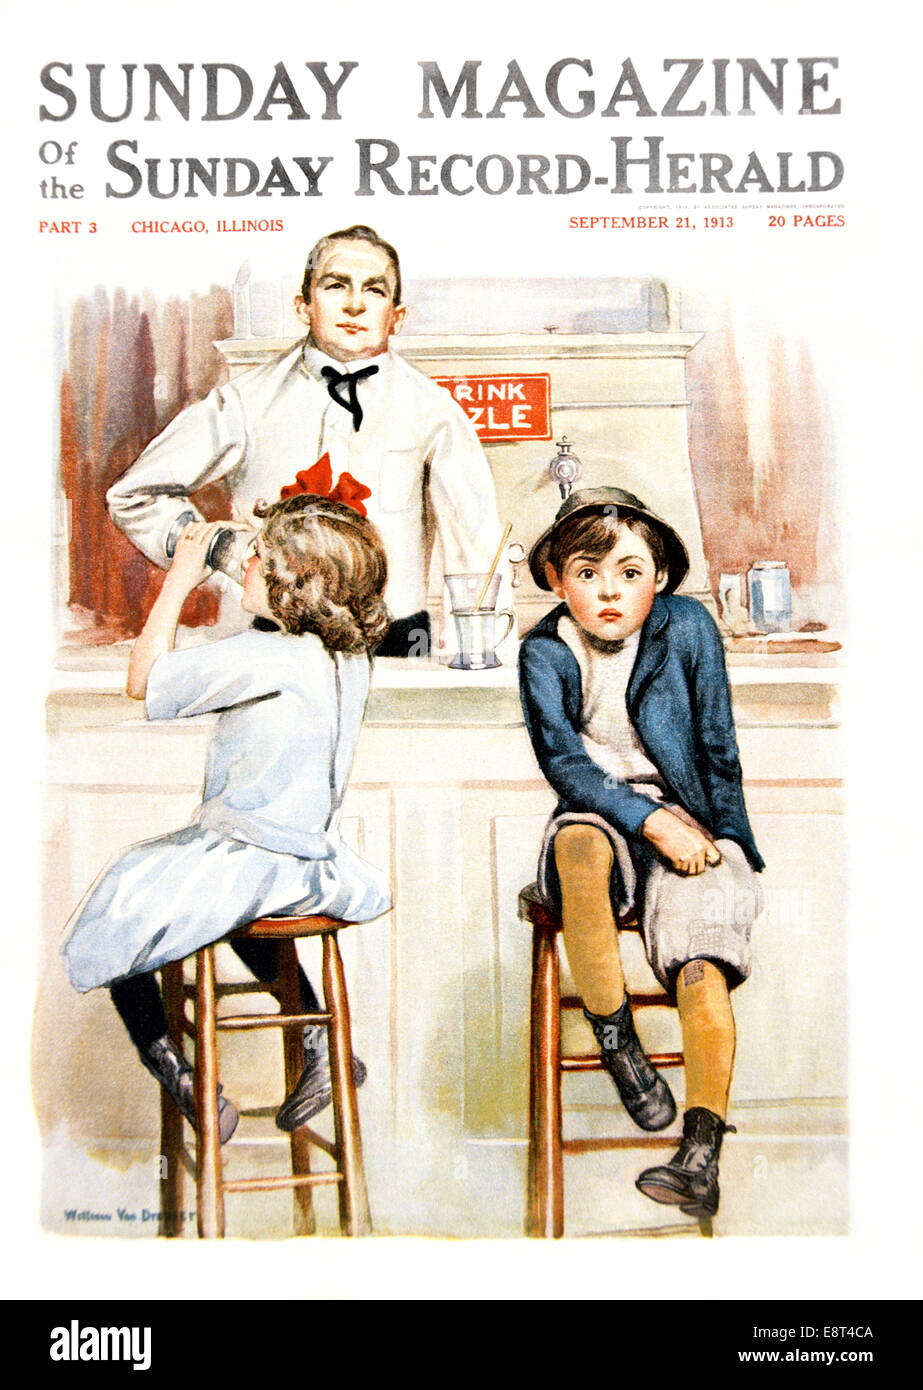 1910s 1913 SUNDAY MAGAZINE COVER GIRL FINISHING DRINK SODA FOUNTAIN COUNTER BOY REACHES IN POCKET FOR MONEY TO PAY FOR SODAS Stock Photo